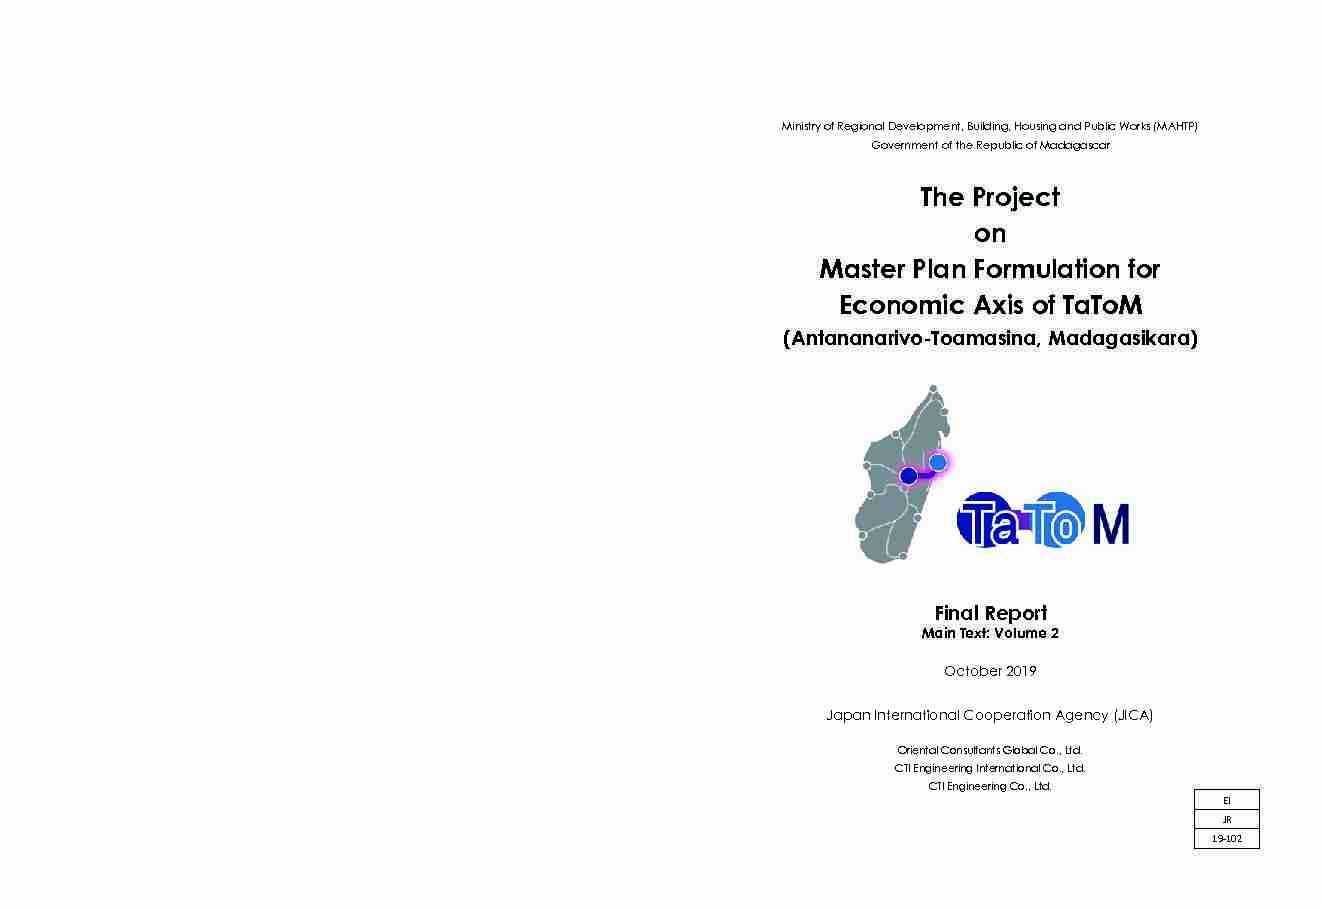 The Project on Master Plan Formulation for Economic Axis of TaToM